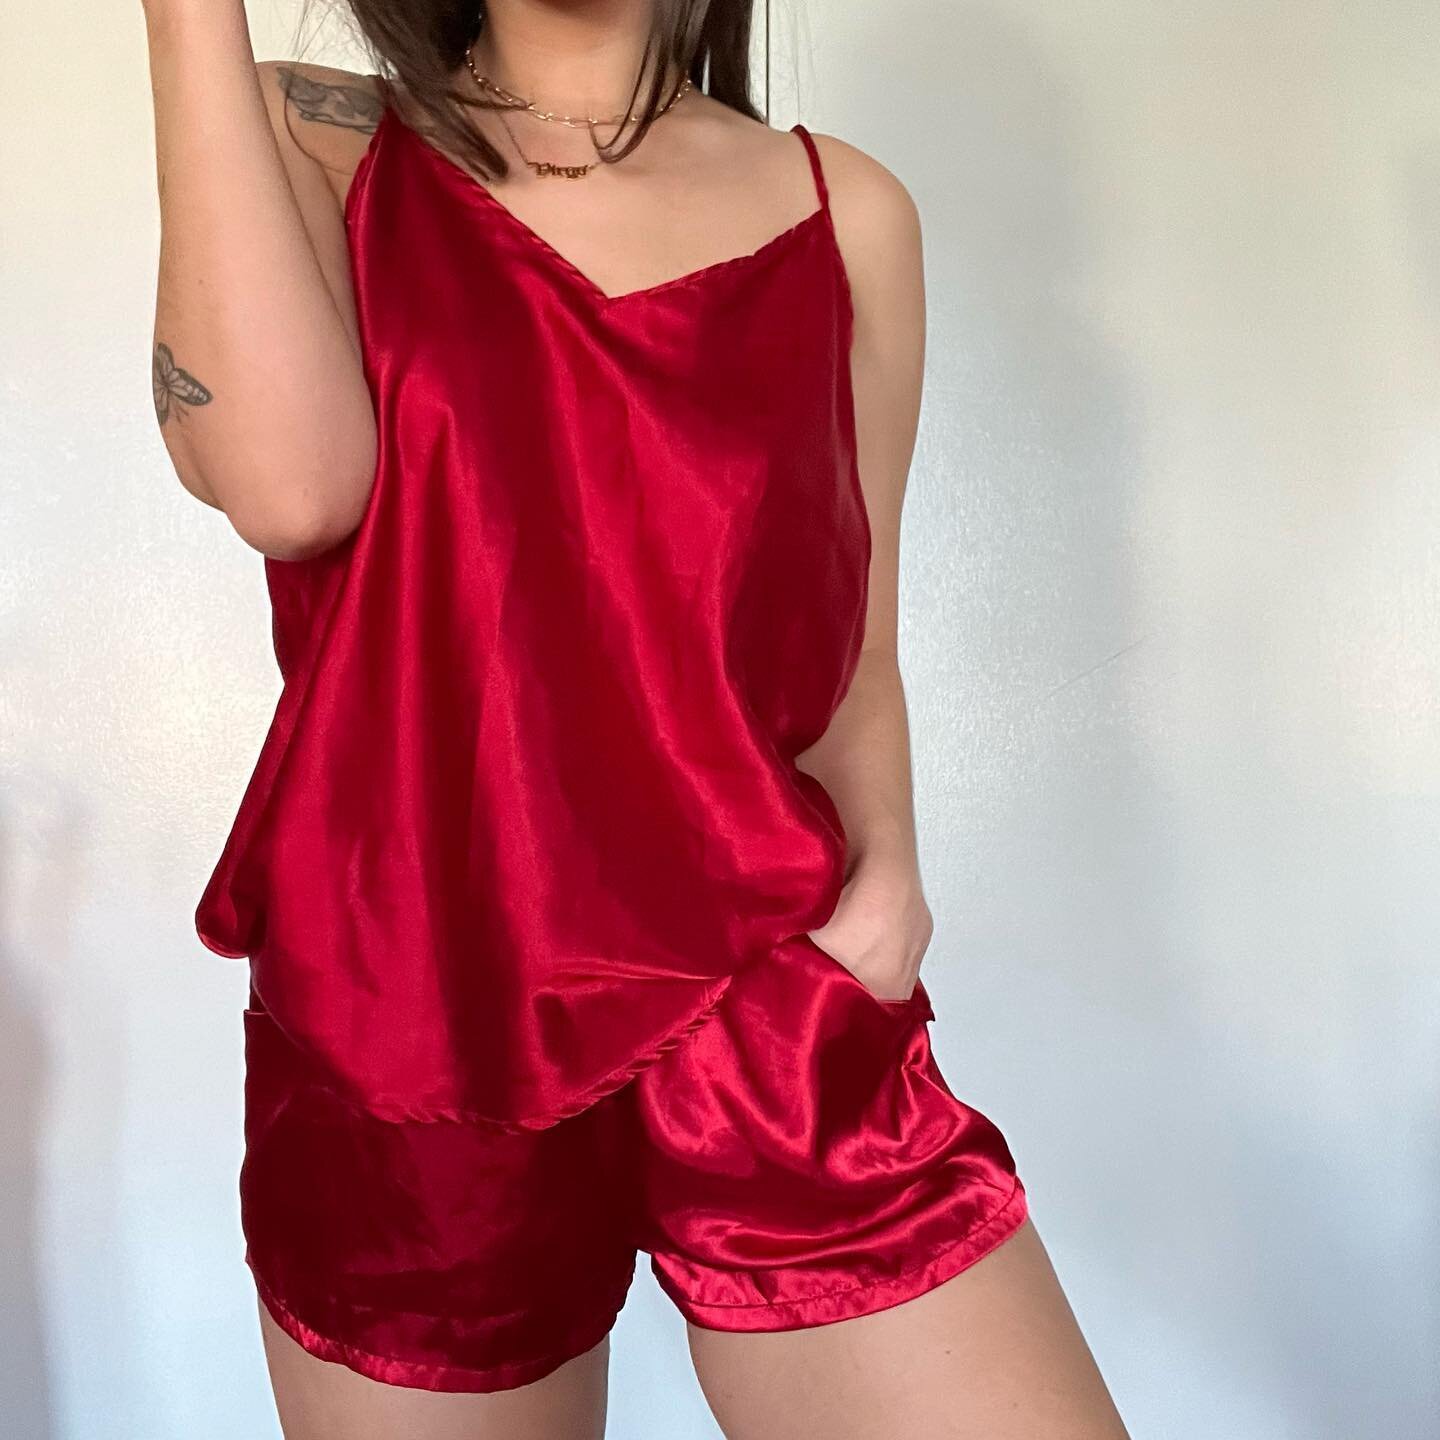 &hearts;️ This lil pj set with pockets is the perfect Christmas morning look (and also with boots at the bar cause why not) Size marked XL, shown as a comfy fit on me, a medium. &bull; $40 shipped &bull; dm to claim #shopsecondhand #vintagelingerie